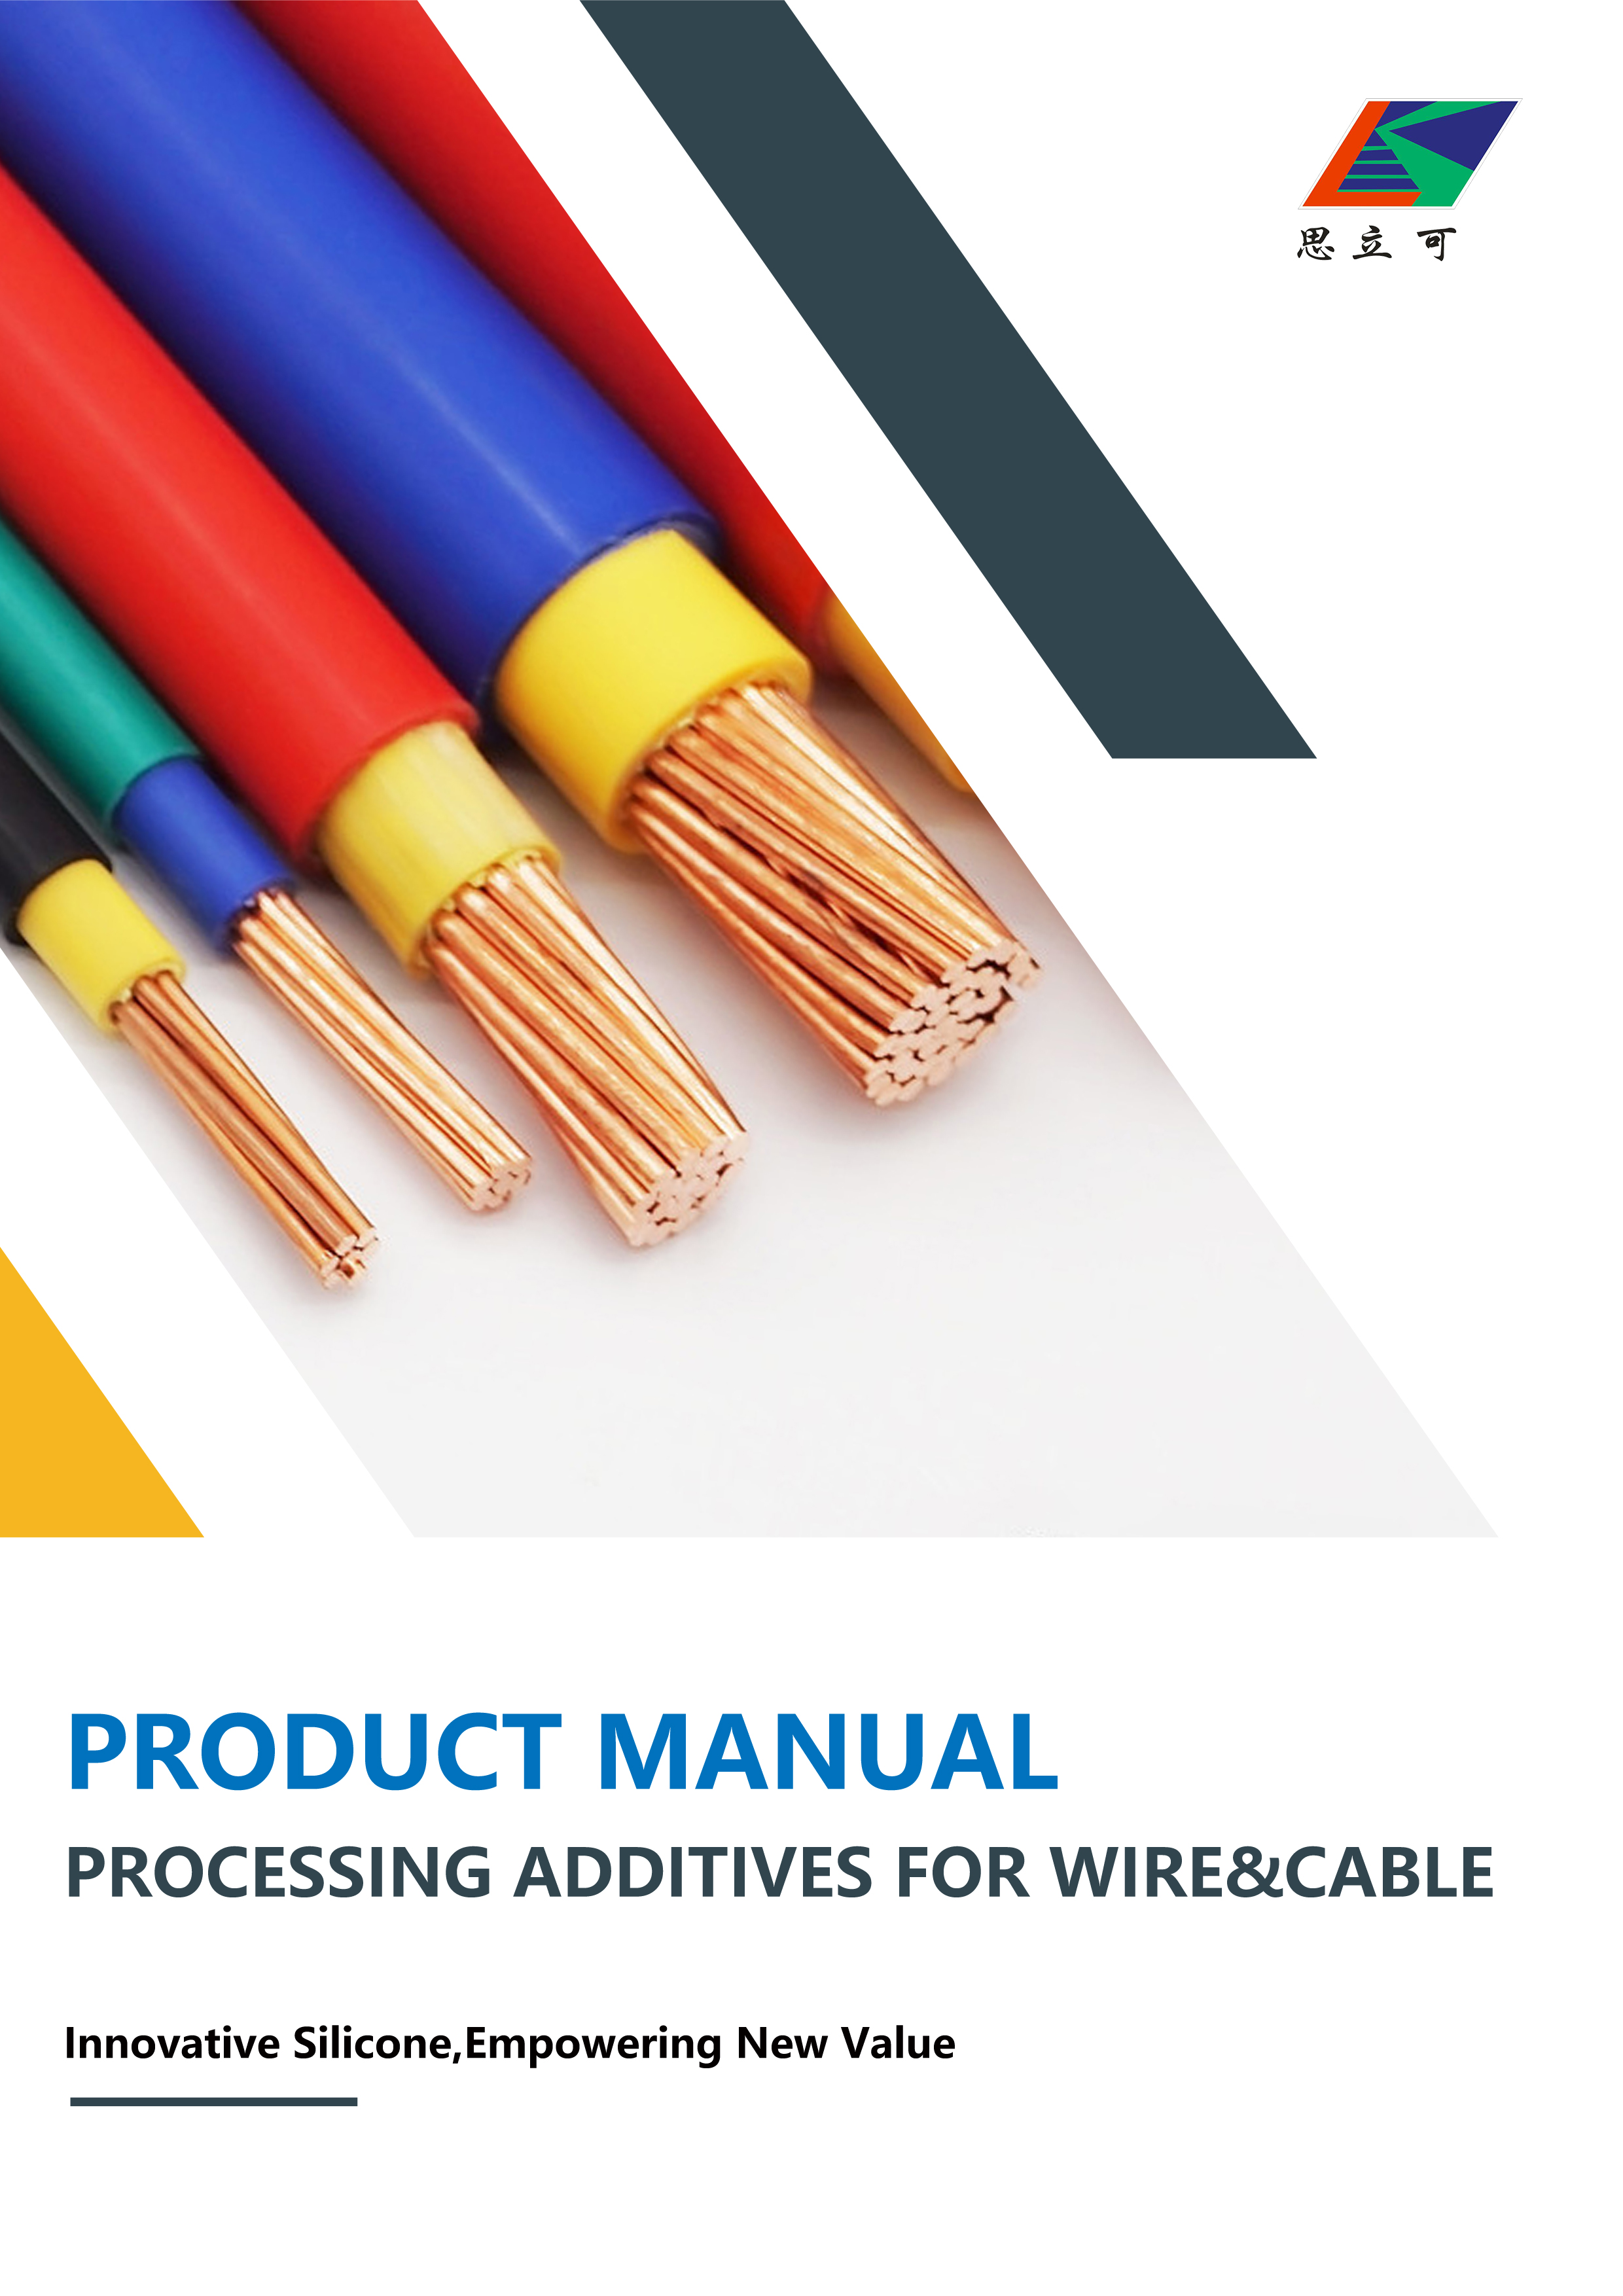 What are the common types of additives for wires and cables?